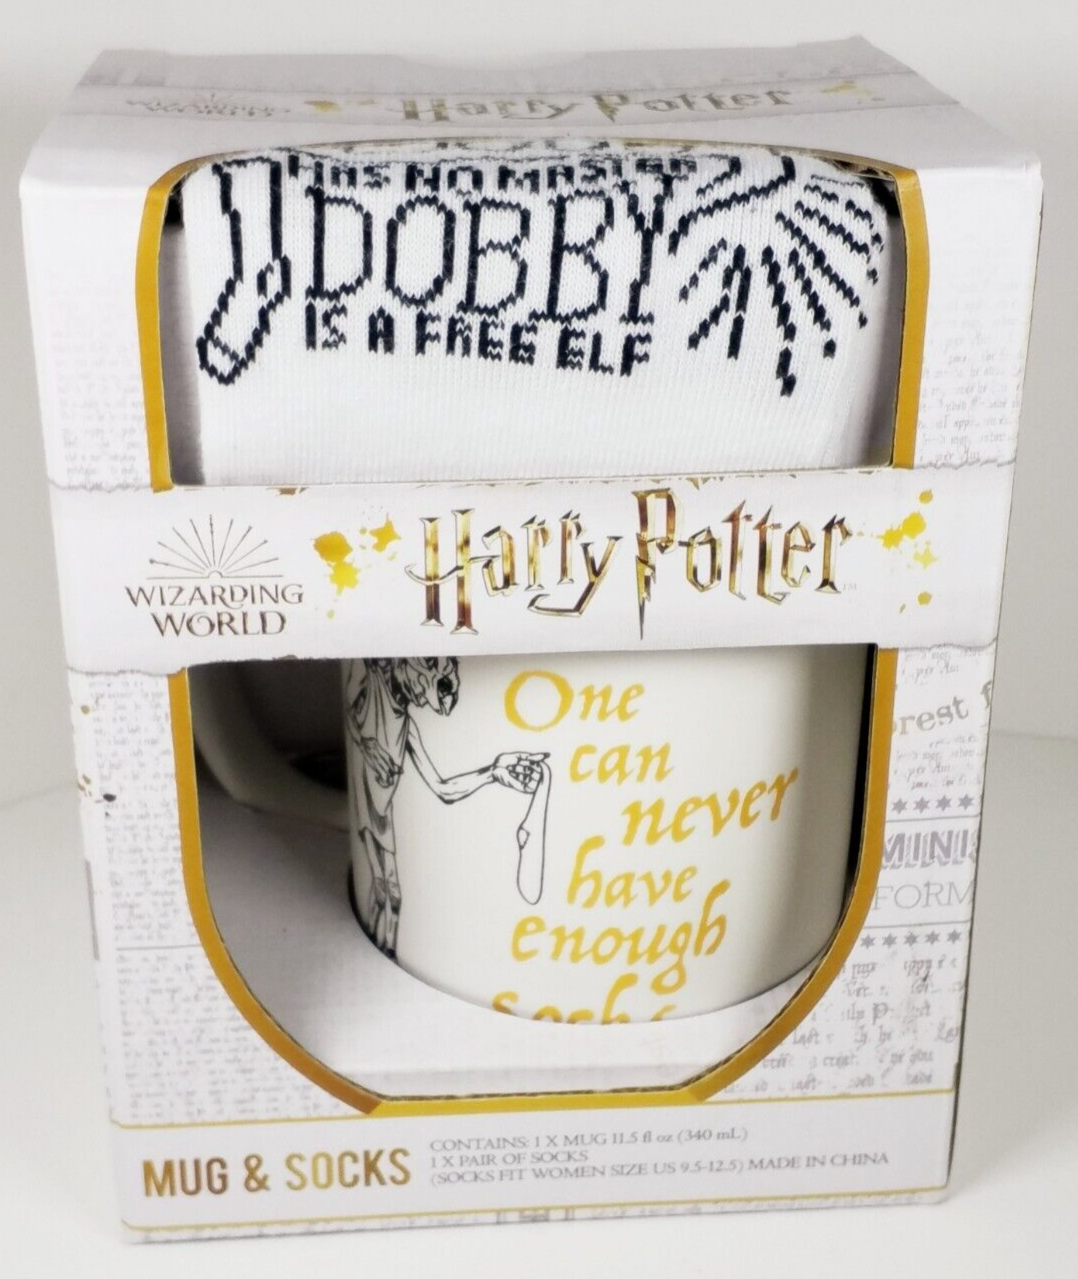 Harry Potter "Dobby is a Free Elf" "One Can Never Have Enough Socks" & Mug Set